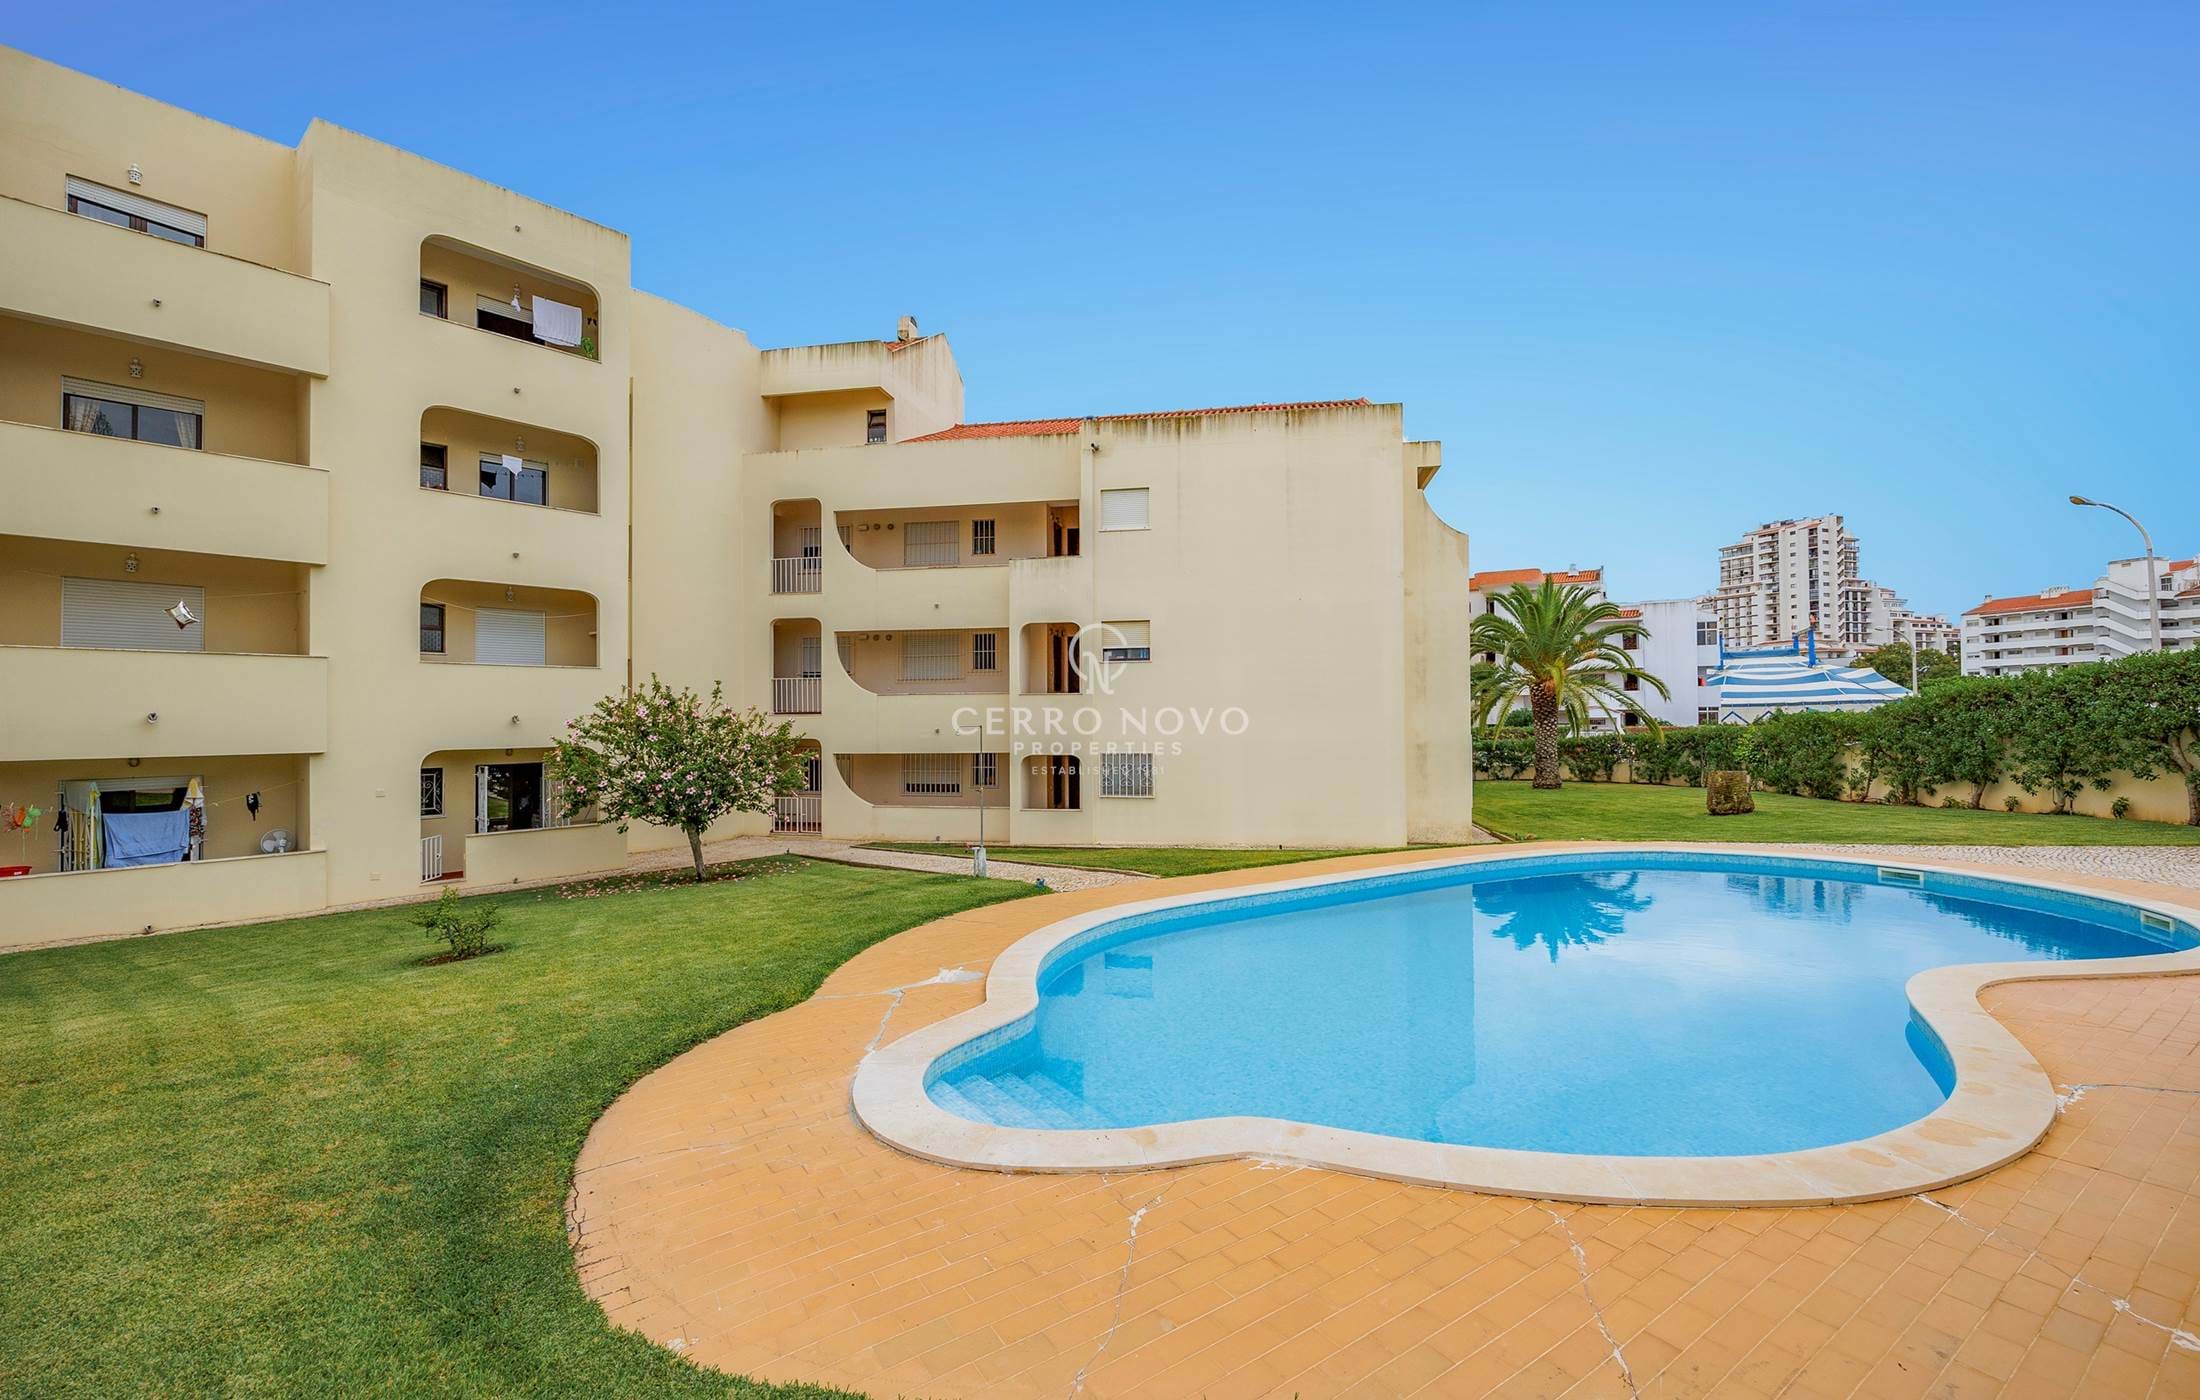 Excellent Apartment in central Albufeira with pool, gardens, and two balconies